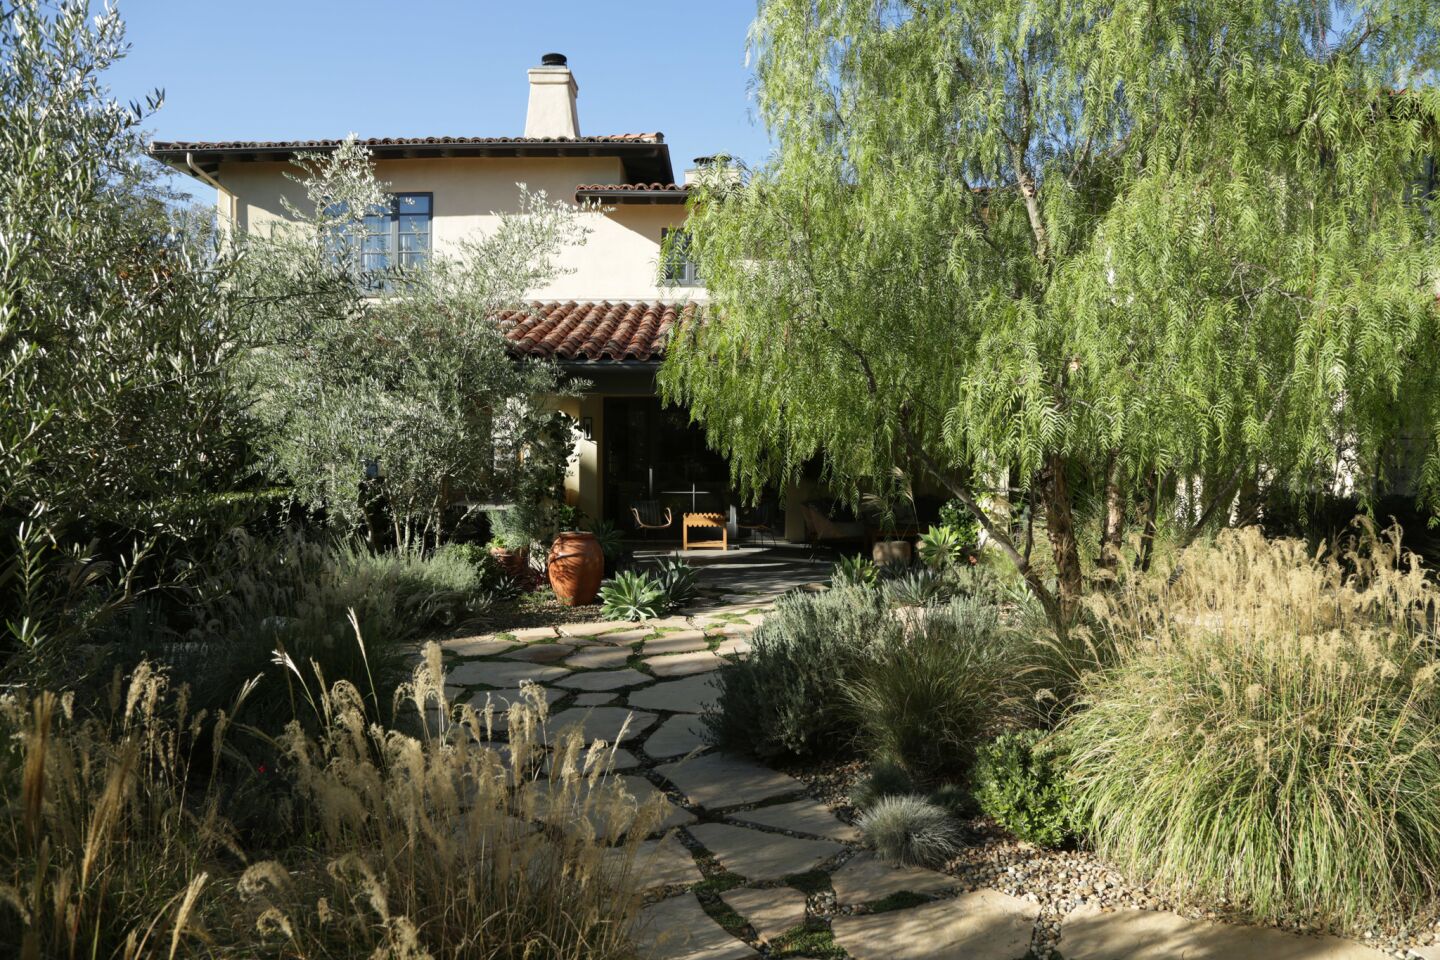 The new drought tolerant garden of Amy Lippman and Rodman Flender extends the footprint of the Spanish home.